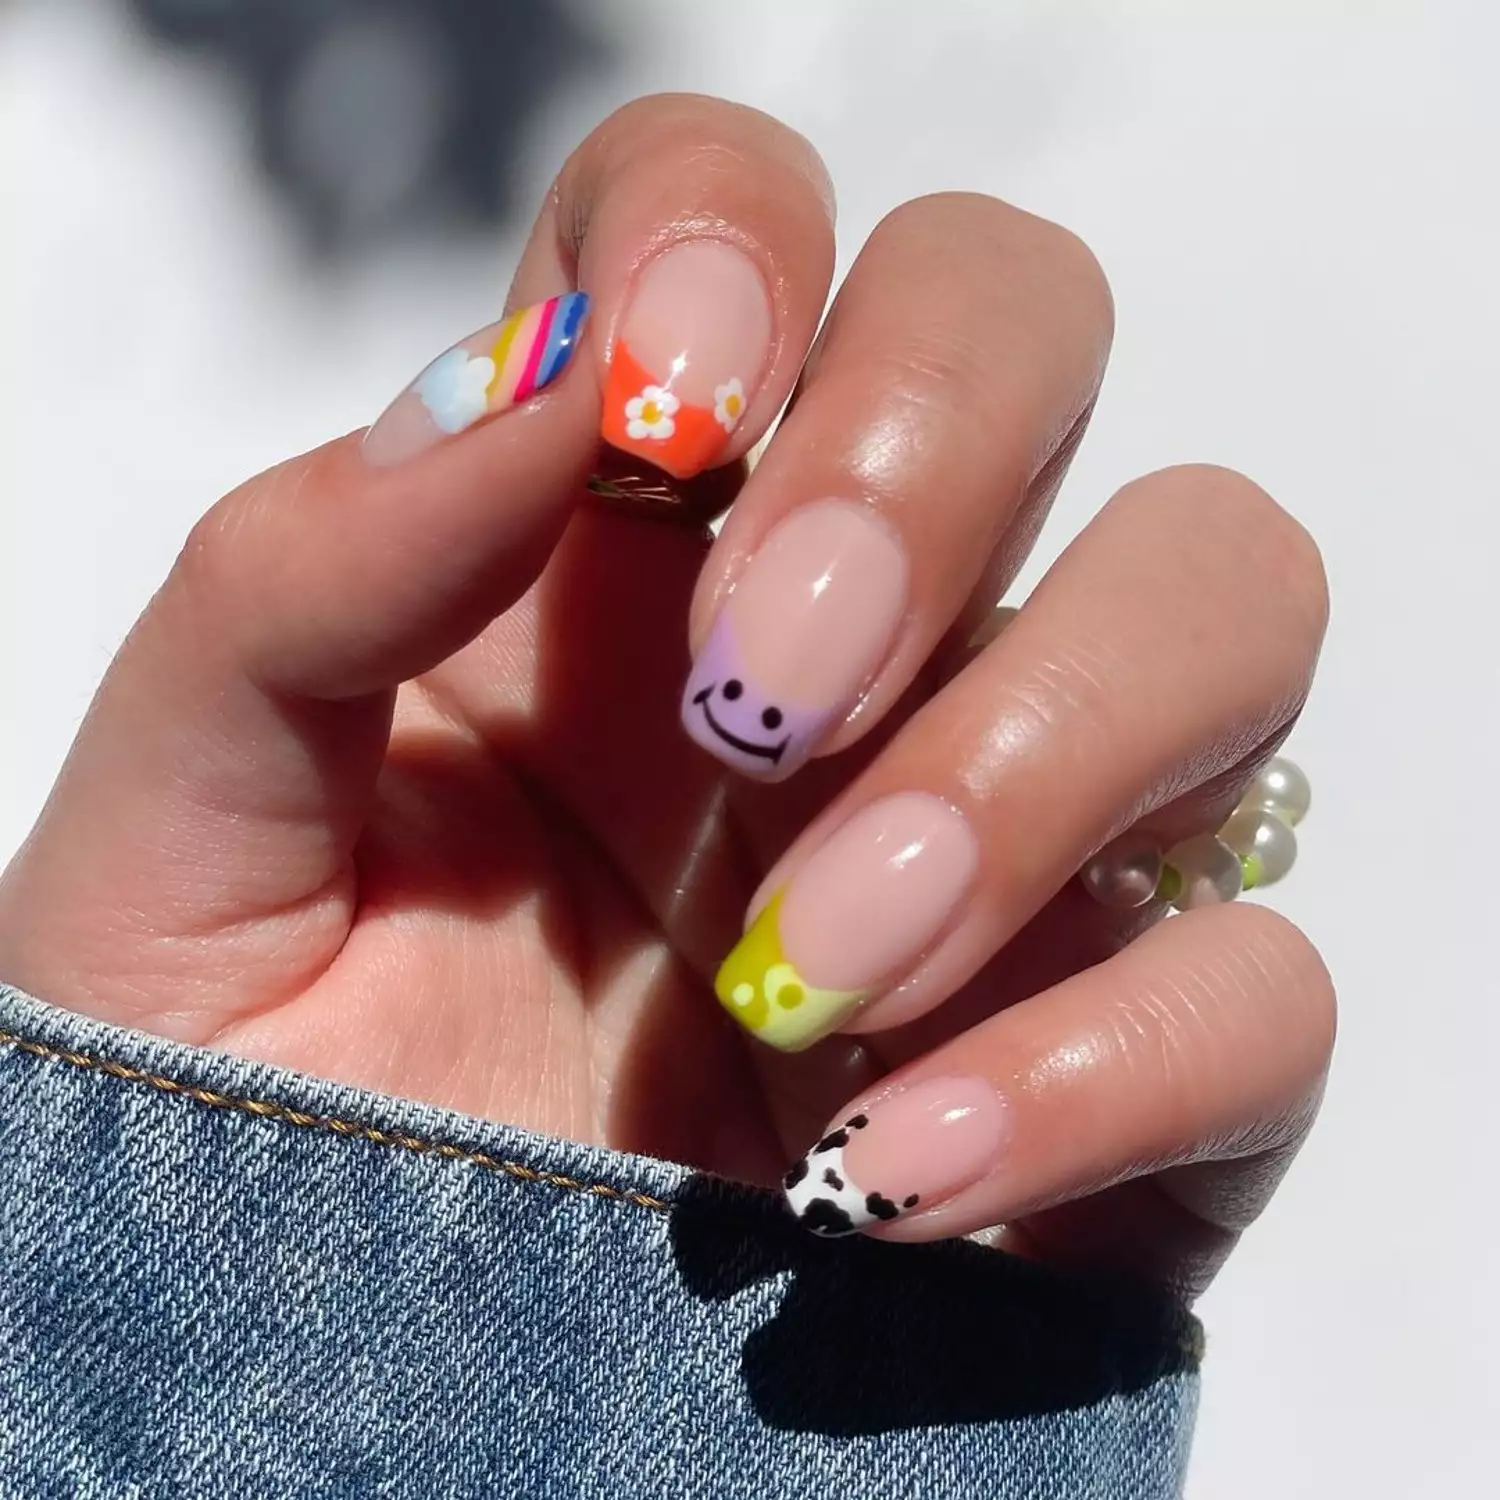 French manicure with mismatched daisy, smiley face, yin/yang, rainbow, and cow print designs